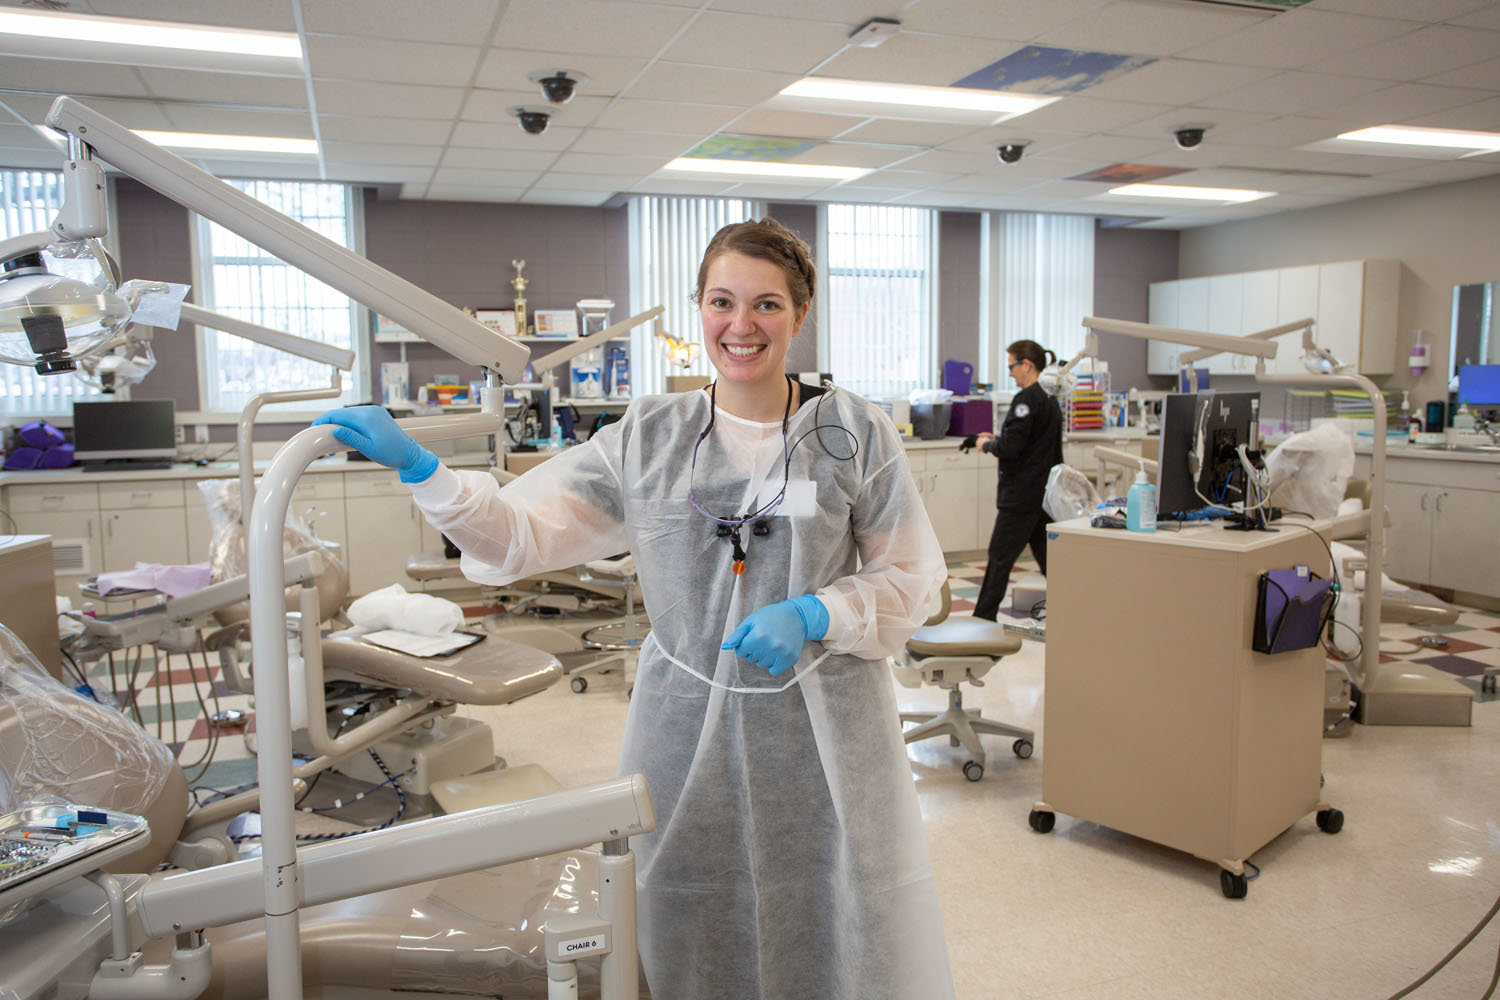 Ozarks Technical Community College student Skylee White is utilizing financial aid from the Fast Track grant program for her dental hygienist studies.